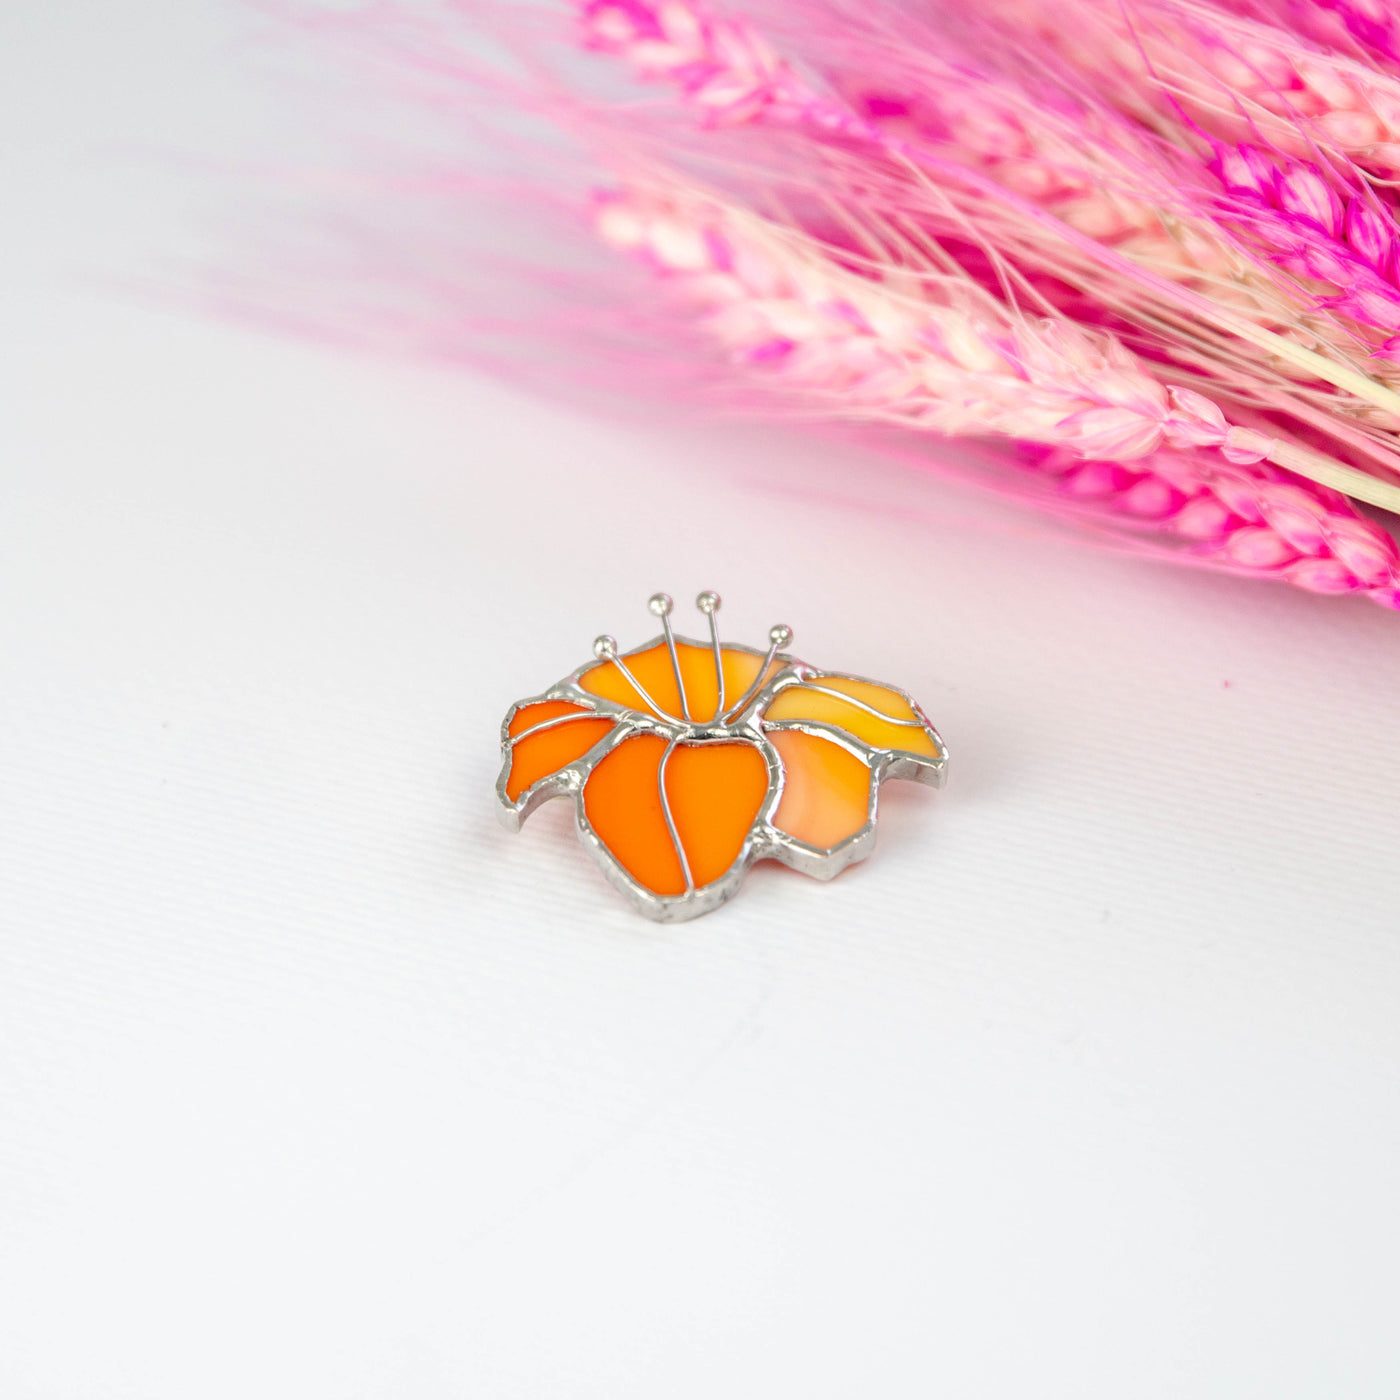 Zoomed stained glass orange lily brooch